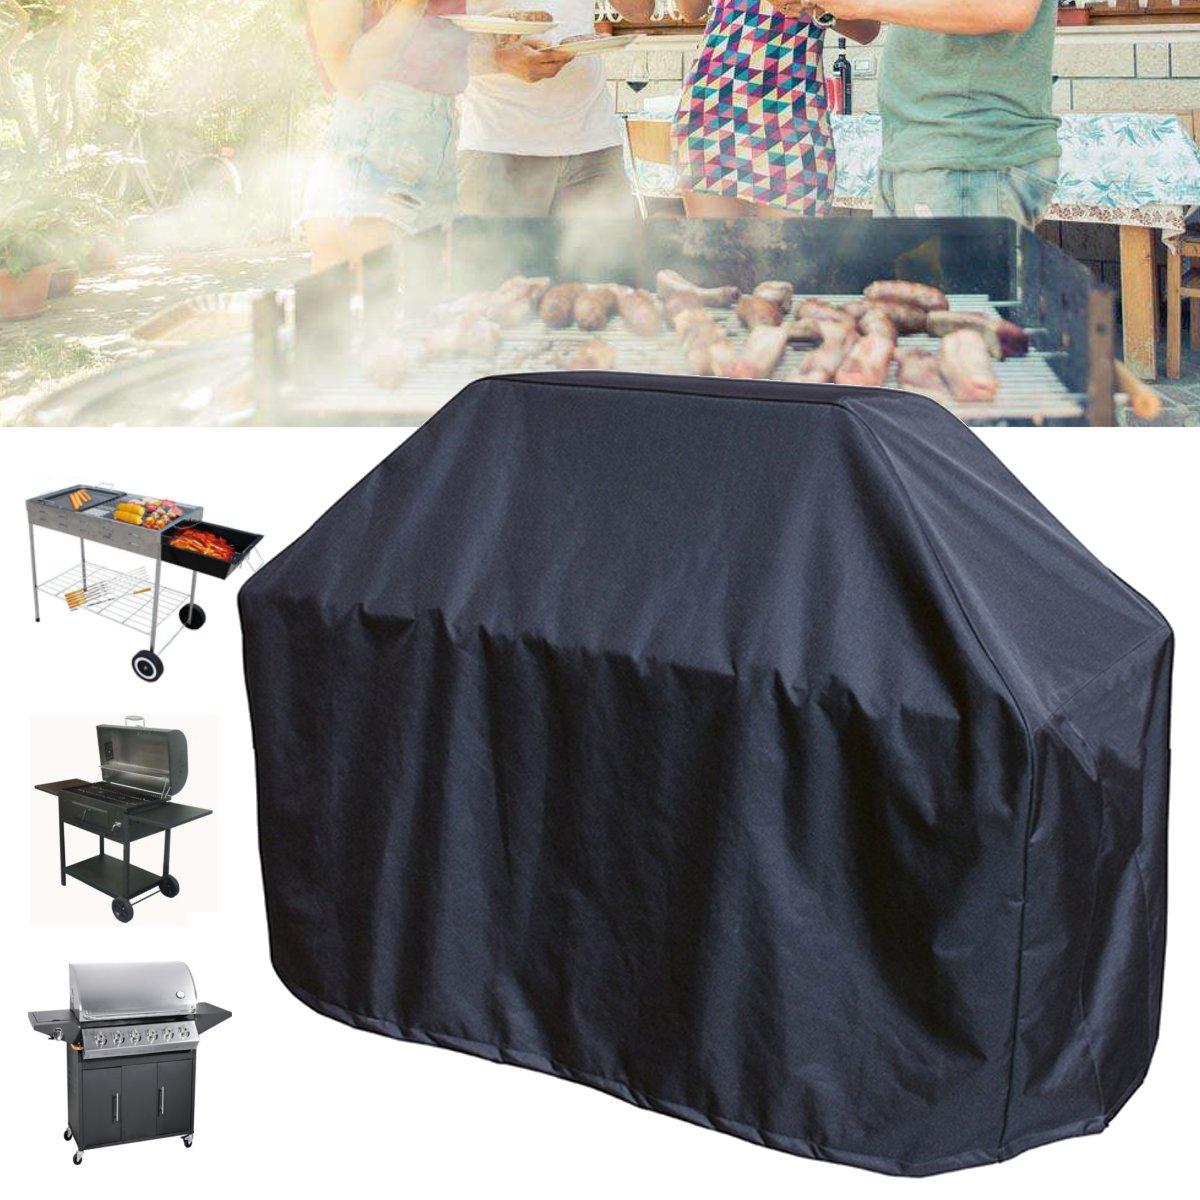 163x61x122cm Black BBQ Grill Barbecue Waterproof Covers Yard Outdoor Cooking Rain Protector